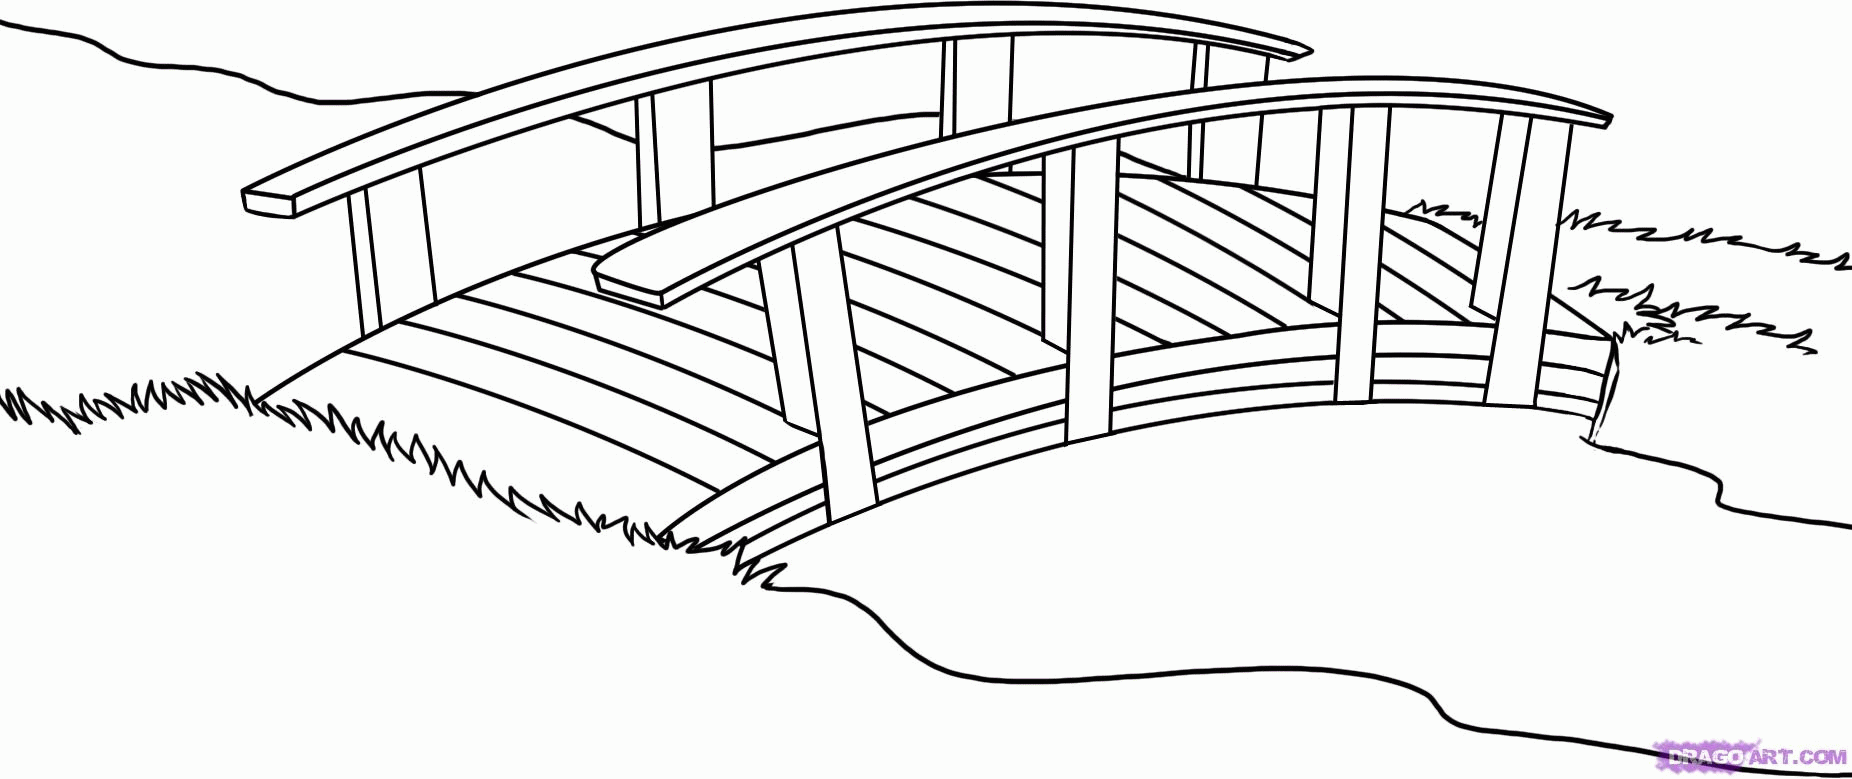  Troll Under Bridge Coloring Page - Three Billy Goats